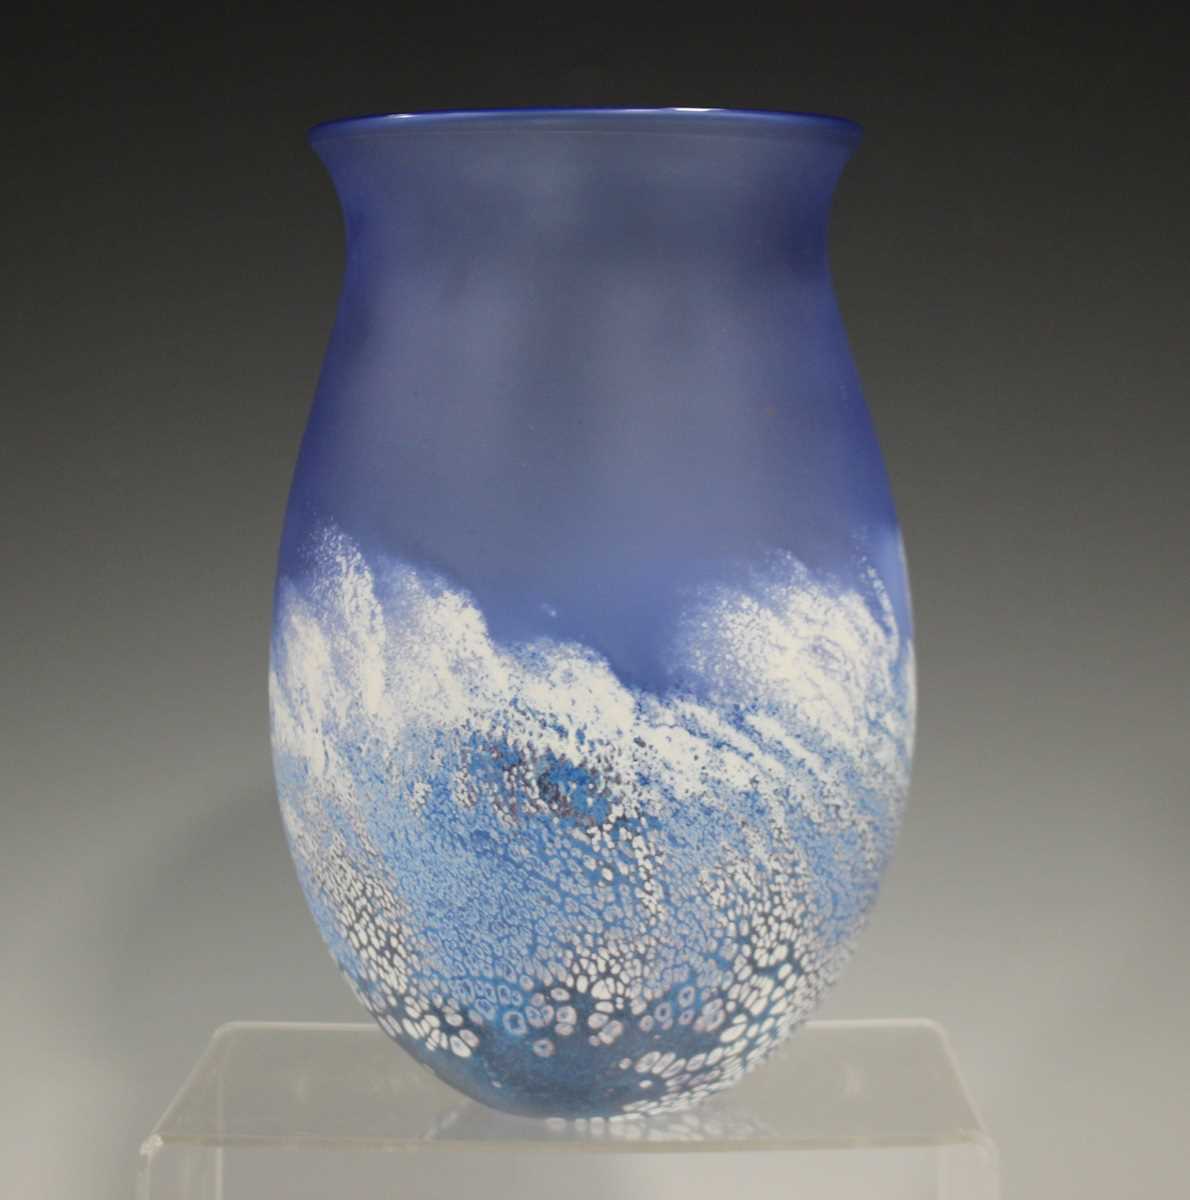 A Malcolm Sutcliffe studio glass vase, contemporary, the frosted blue body cased in darker blue - Image 2 of 3